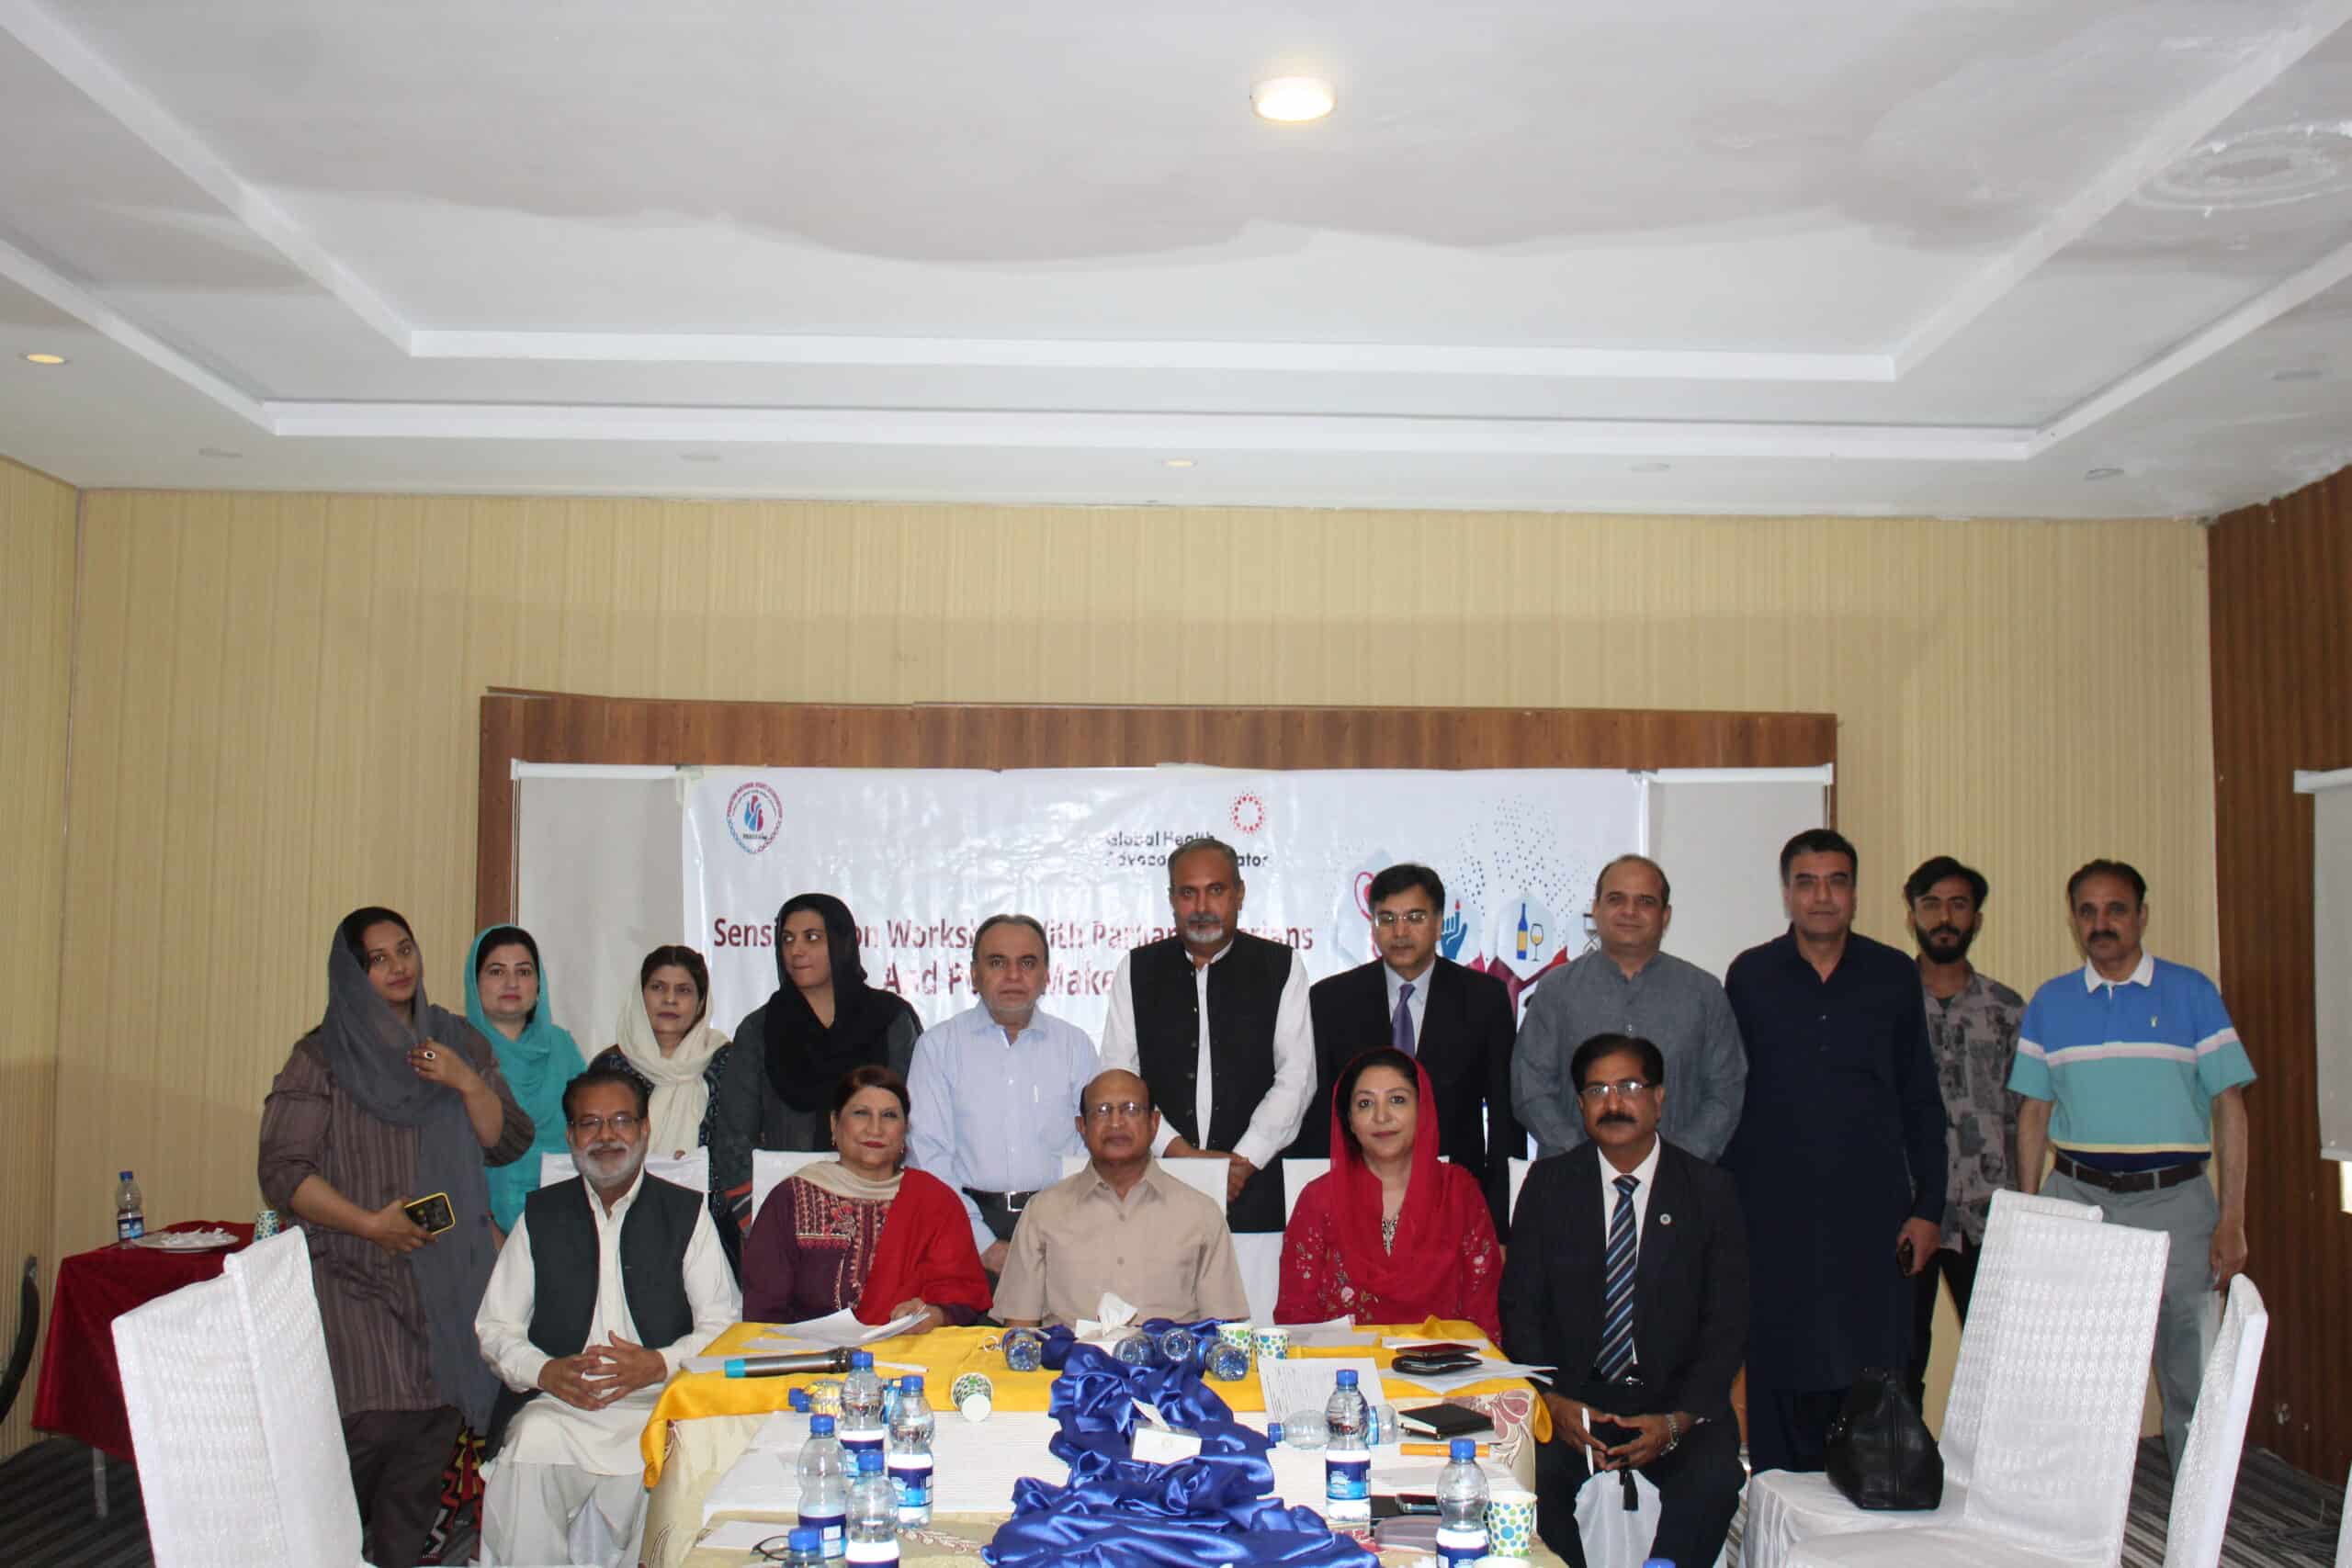 Panah Organised An Sensitization Workshop with Parliamentarians And Policy Makers On Sugary Drinks tax Policy & way Forward. Venue: Shangrila Hotel Murree